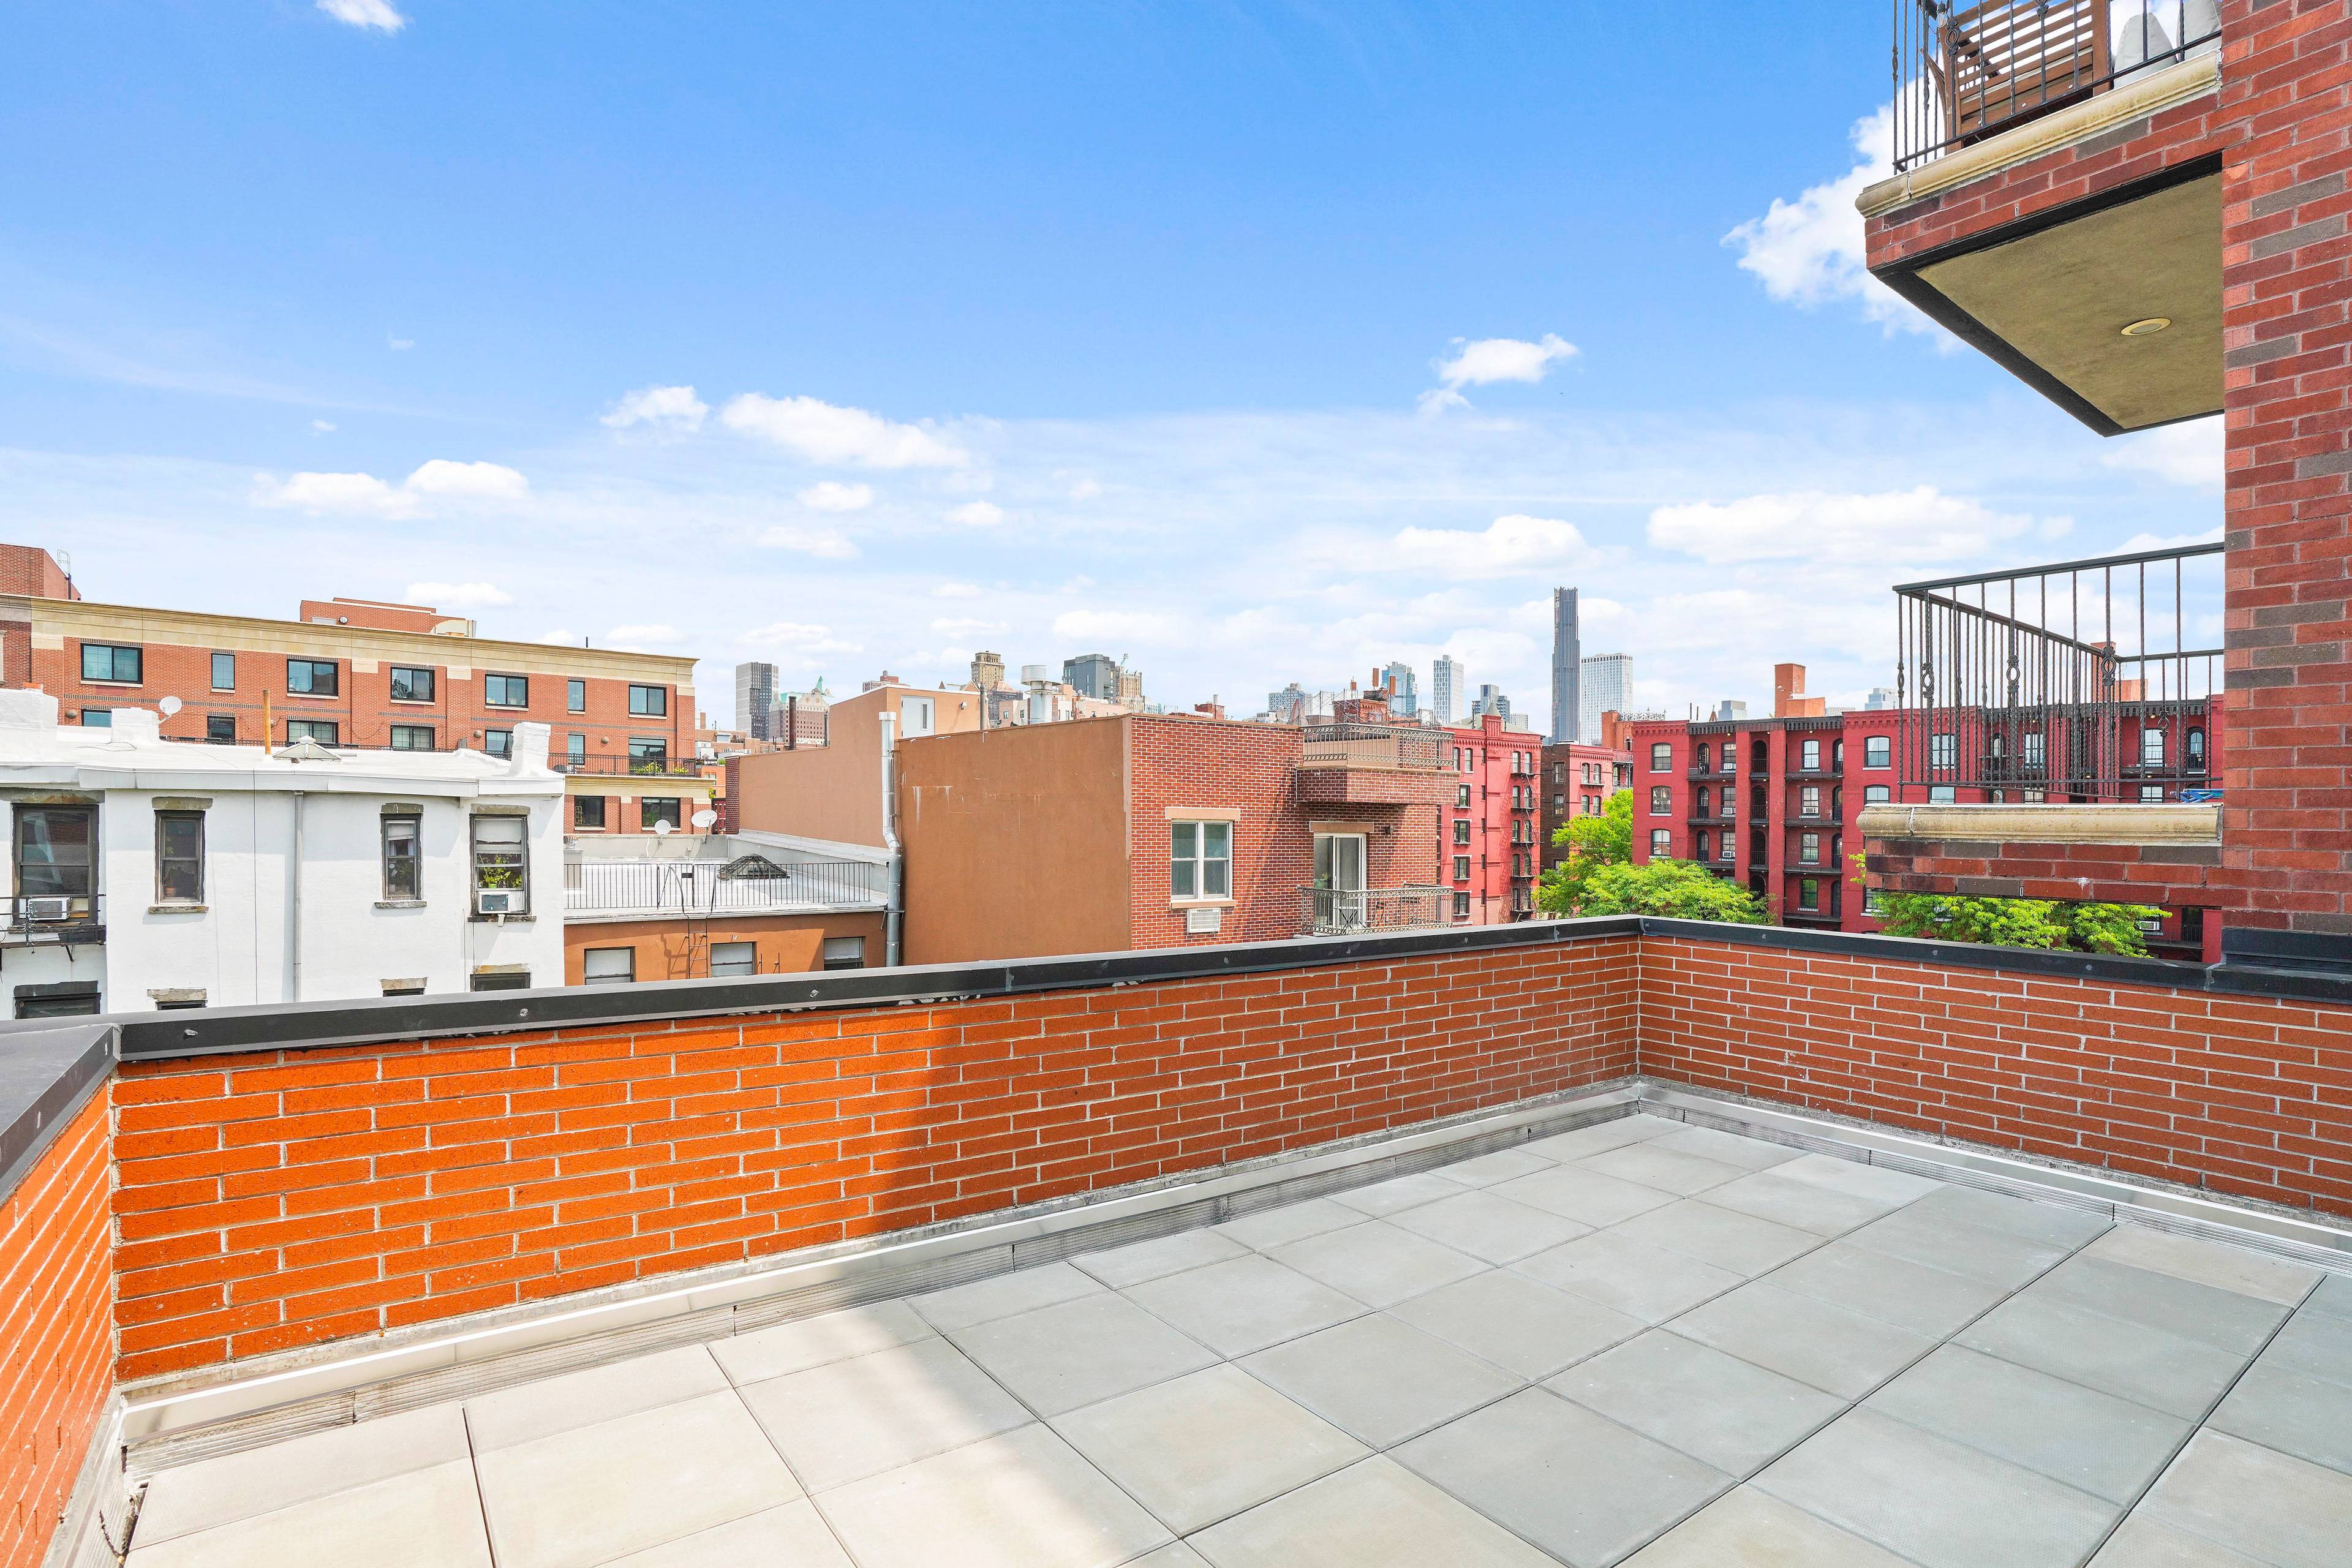 Welcome to a luxurious duplex condo located in the coveted Cobble Hill area of Brooklyn.